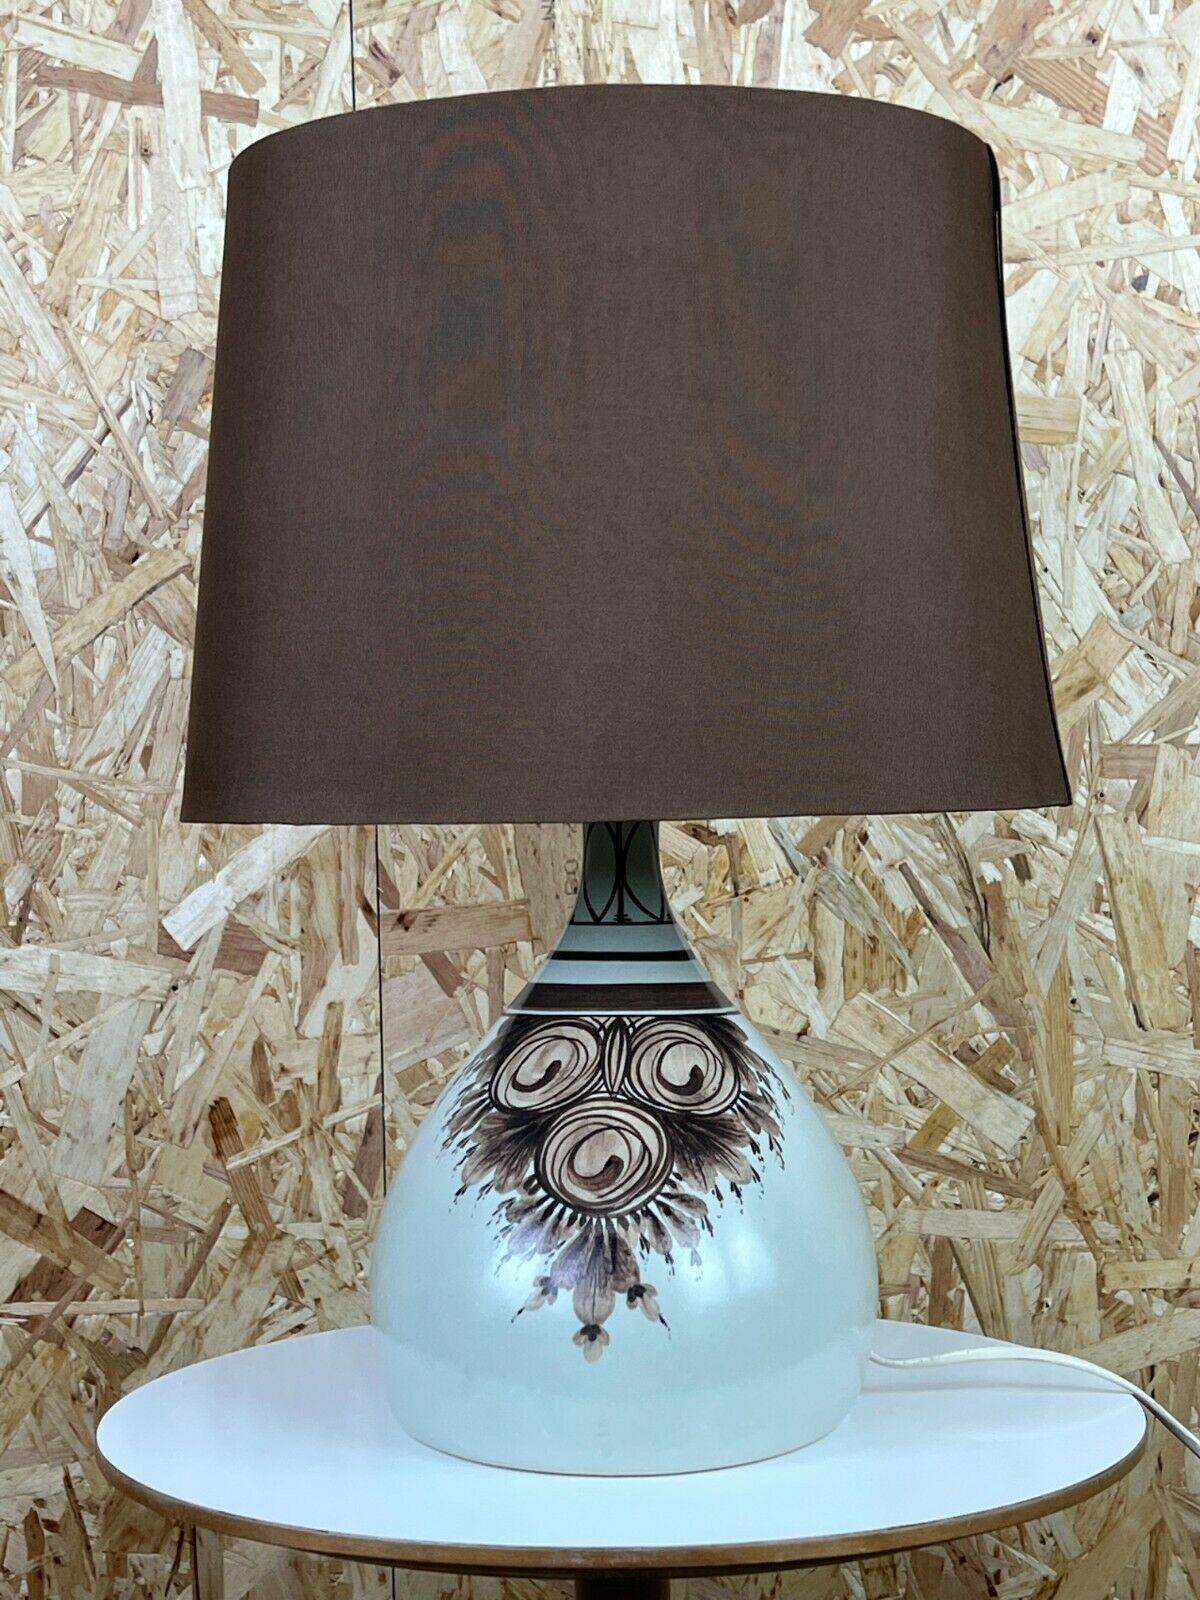 60s table lamp